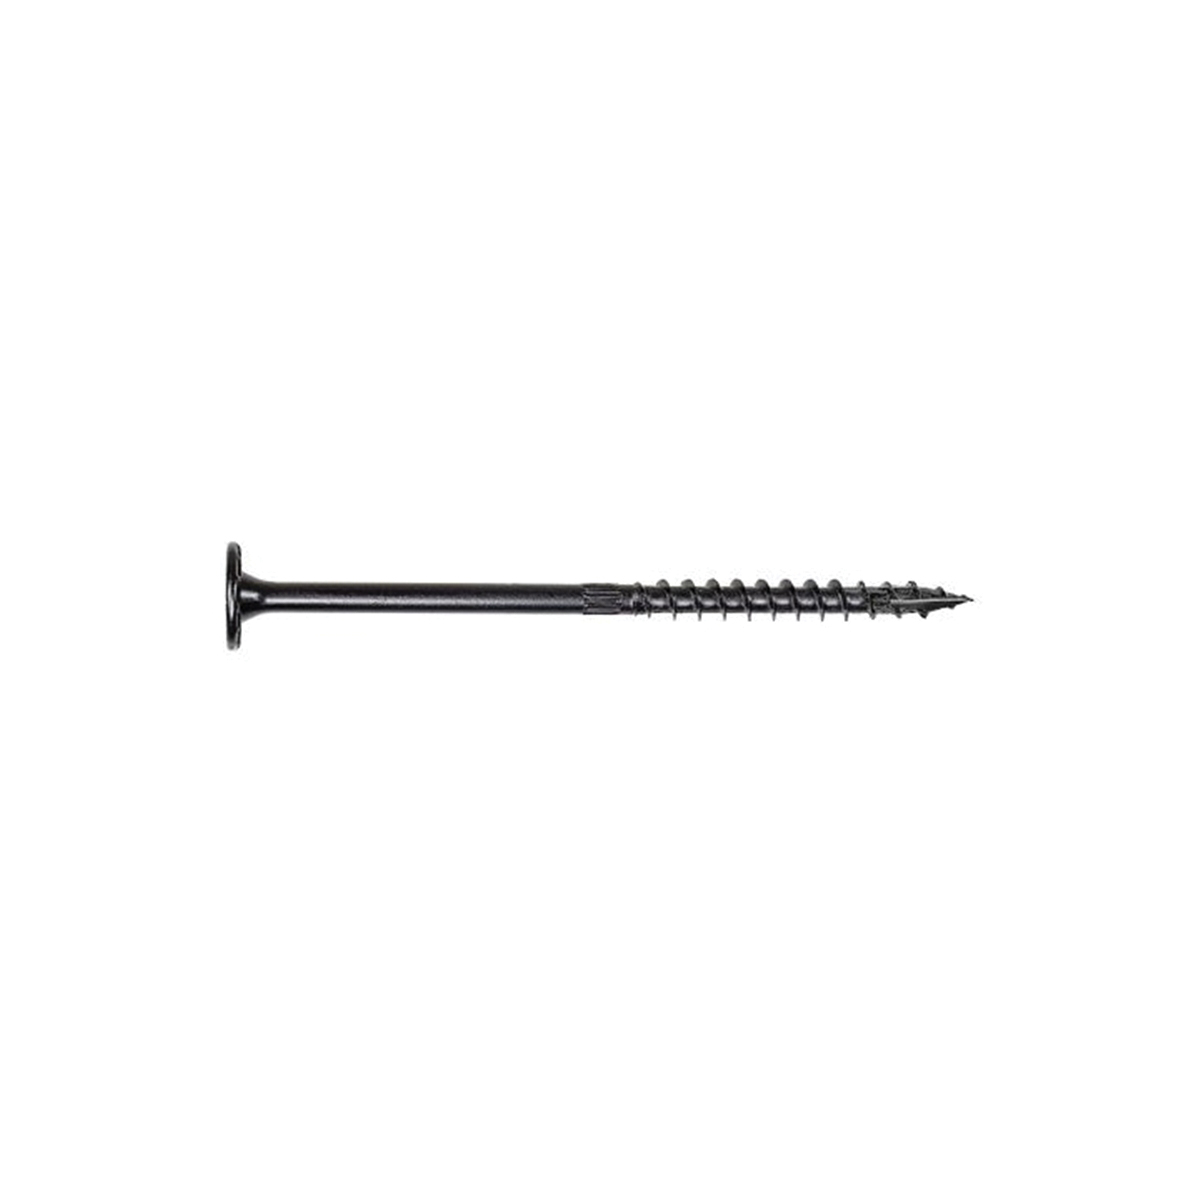 Outdoor Accents SDWS22512DBB-RN1 Structural Screw, 5-1/2 in L, Saw Tooth Thread, Low-Profile Head